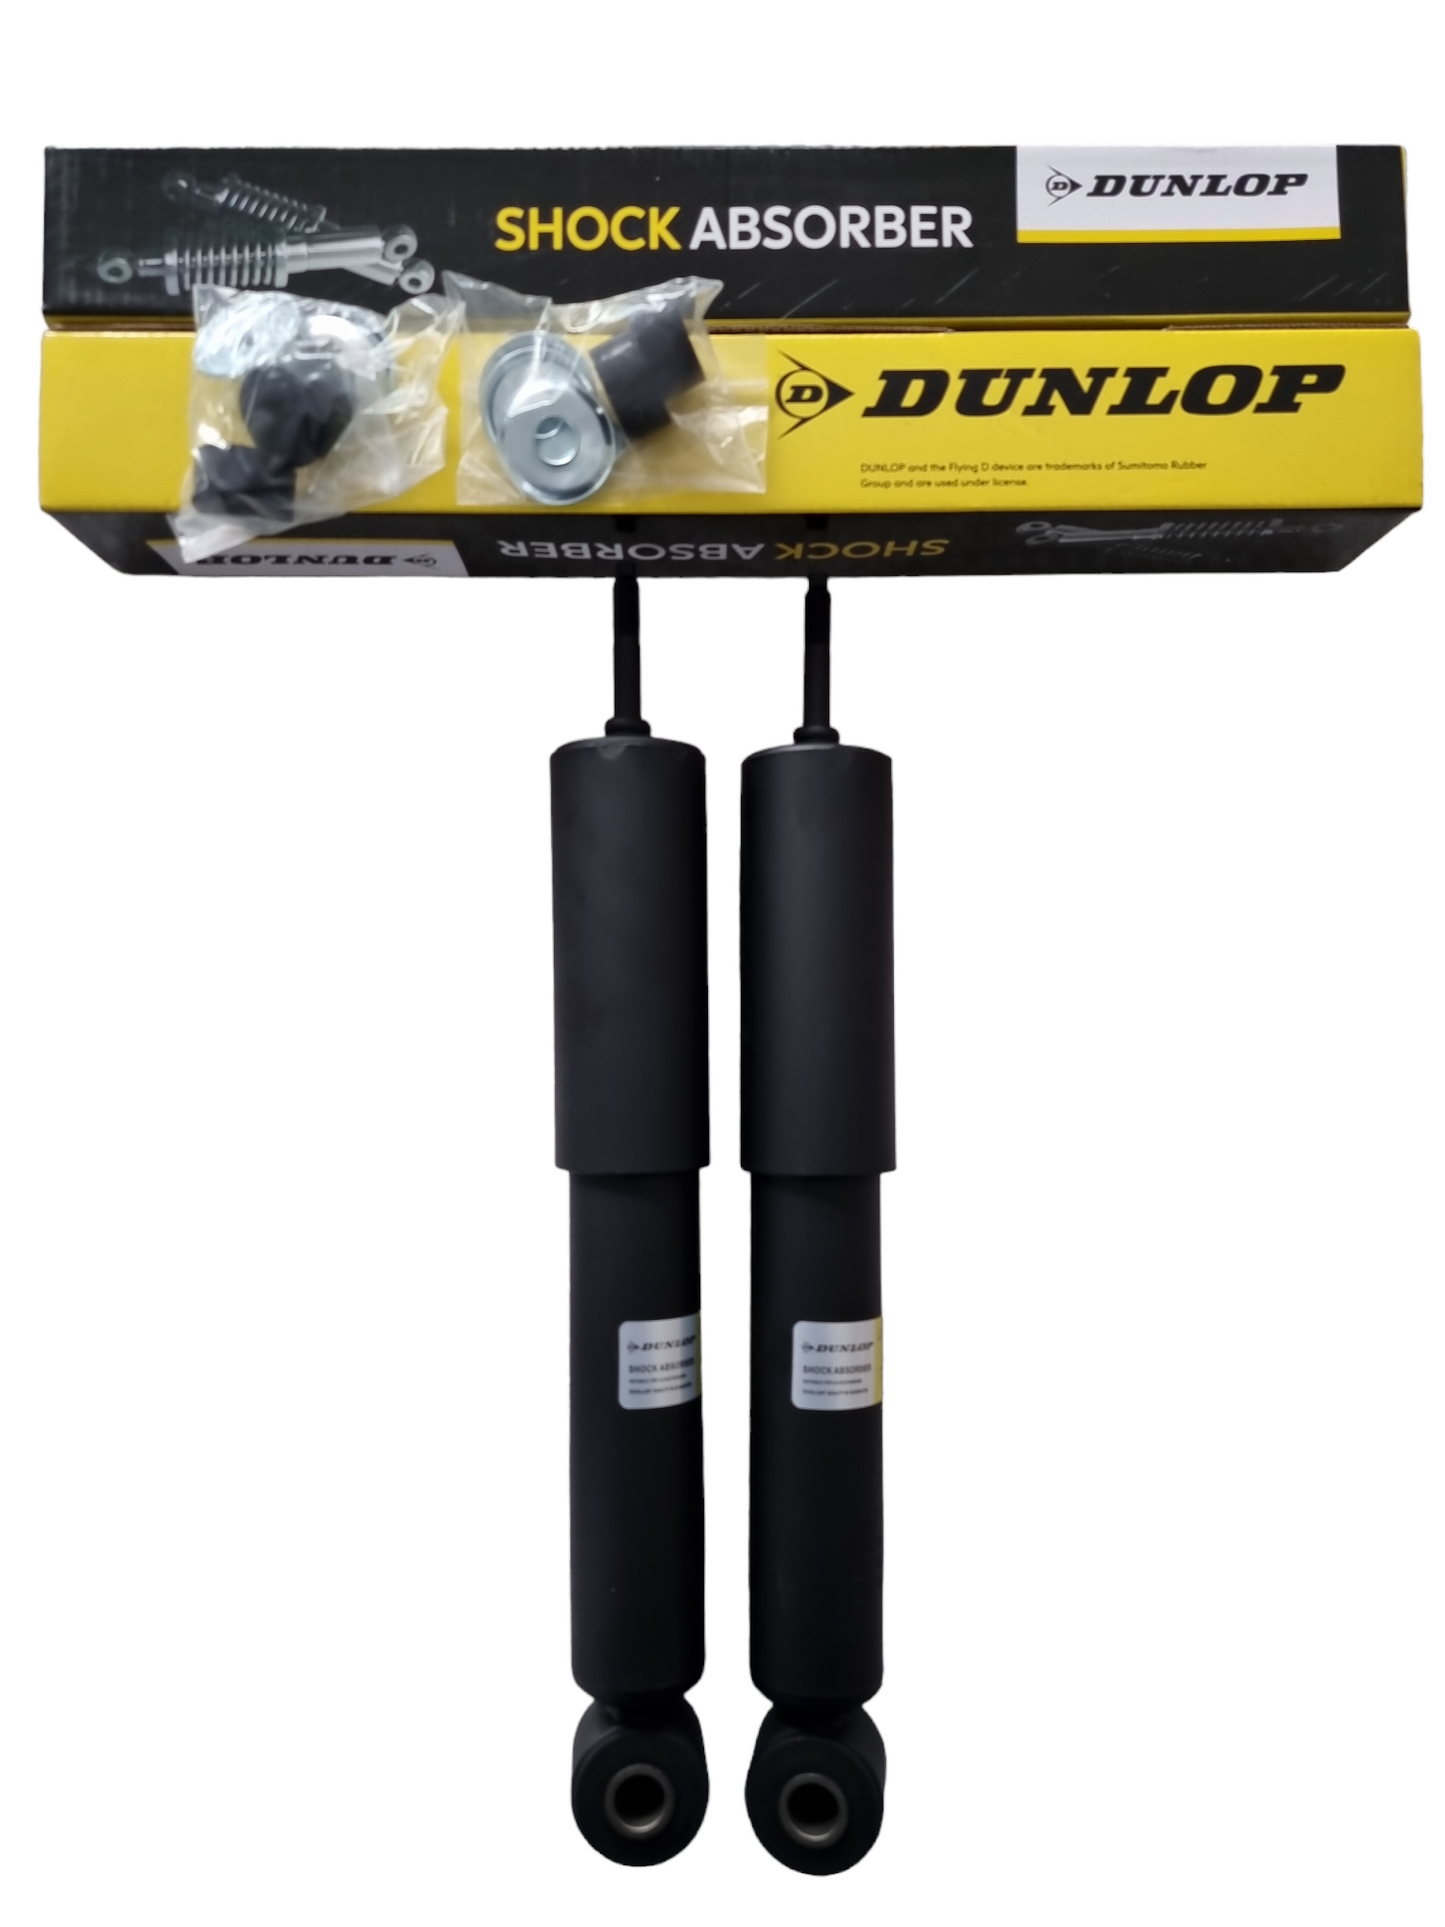 Dunlop Shock Absorber Front Toyota Hilux P690 4WD 2WD RAID 98-05 Per Pair